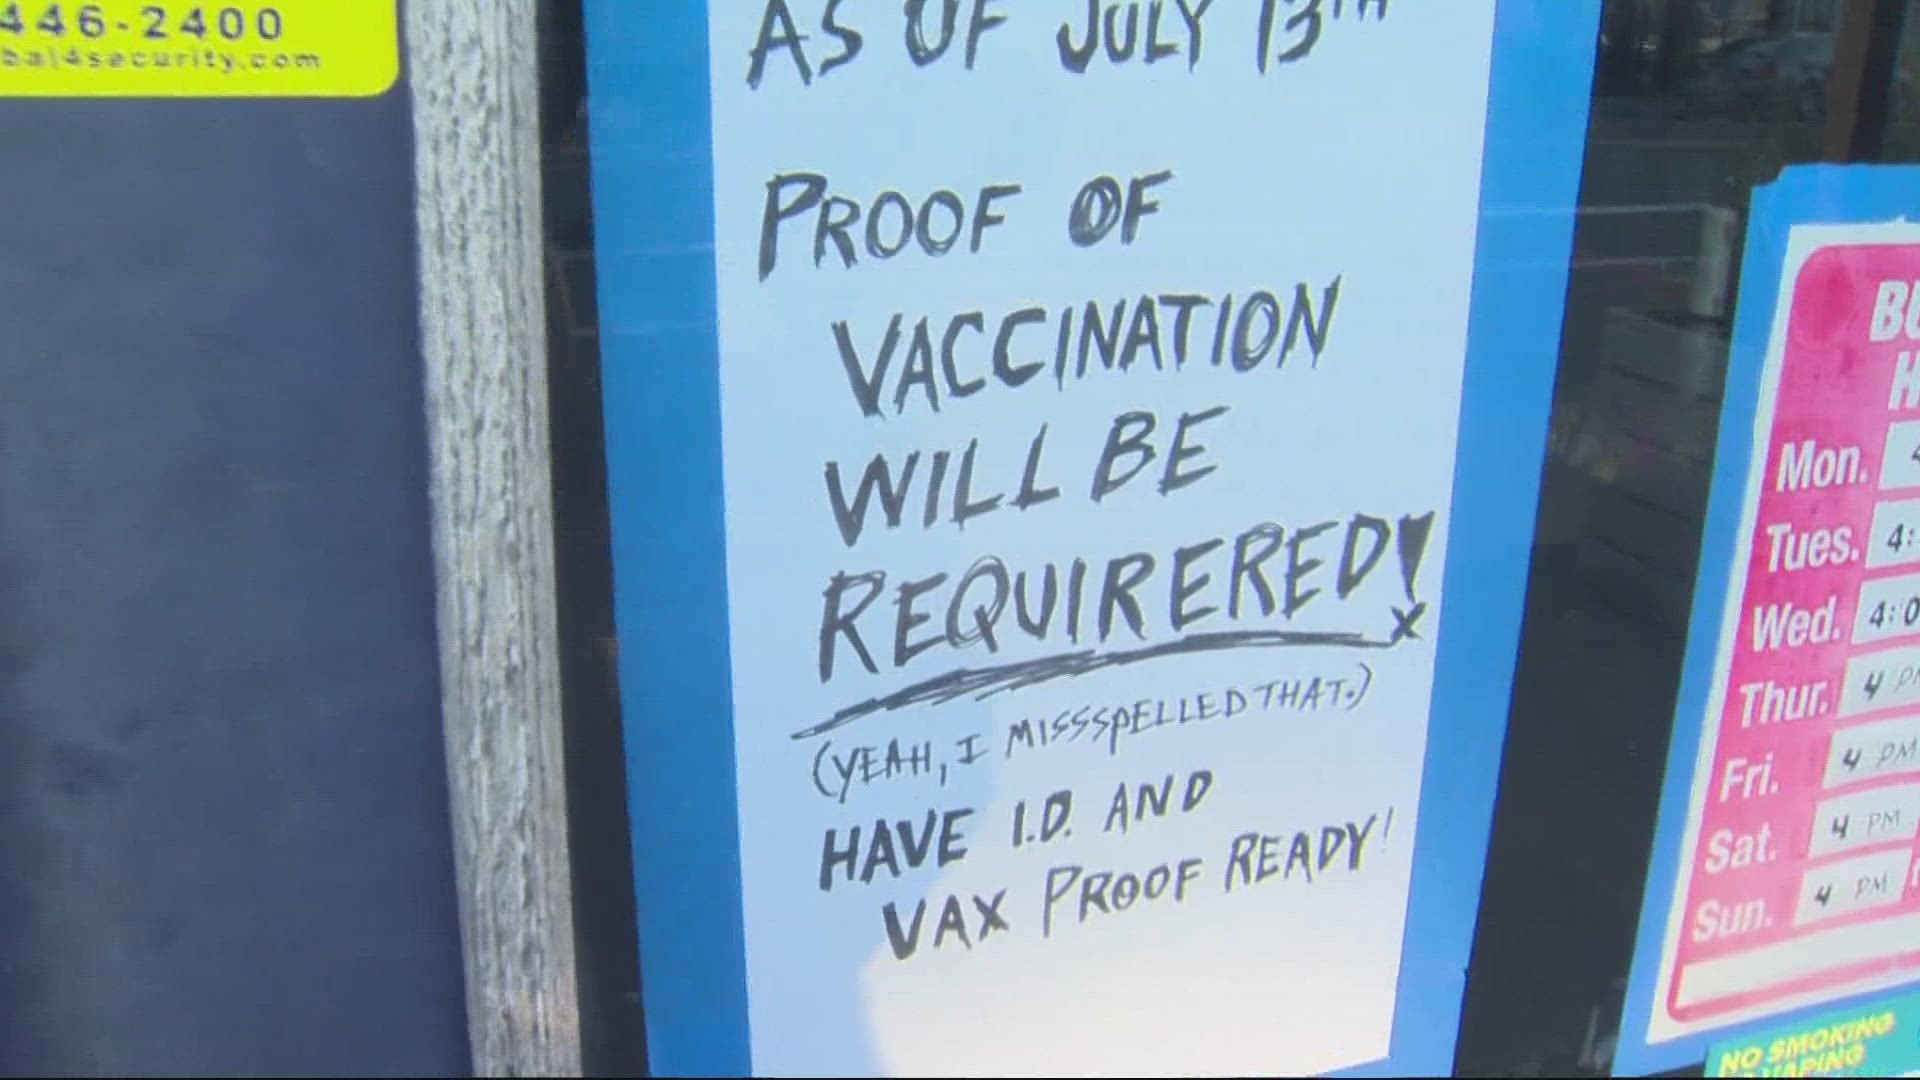 Some bars in Portland are requiring proof of vaccination upon entry and others are requiring only masks after push back from angry customers.